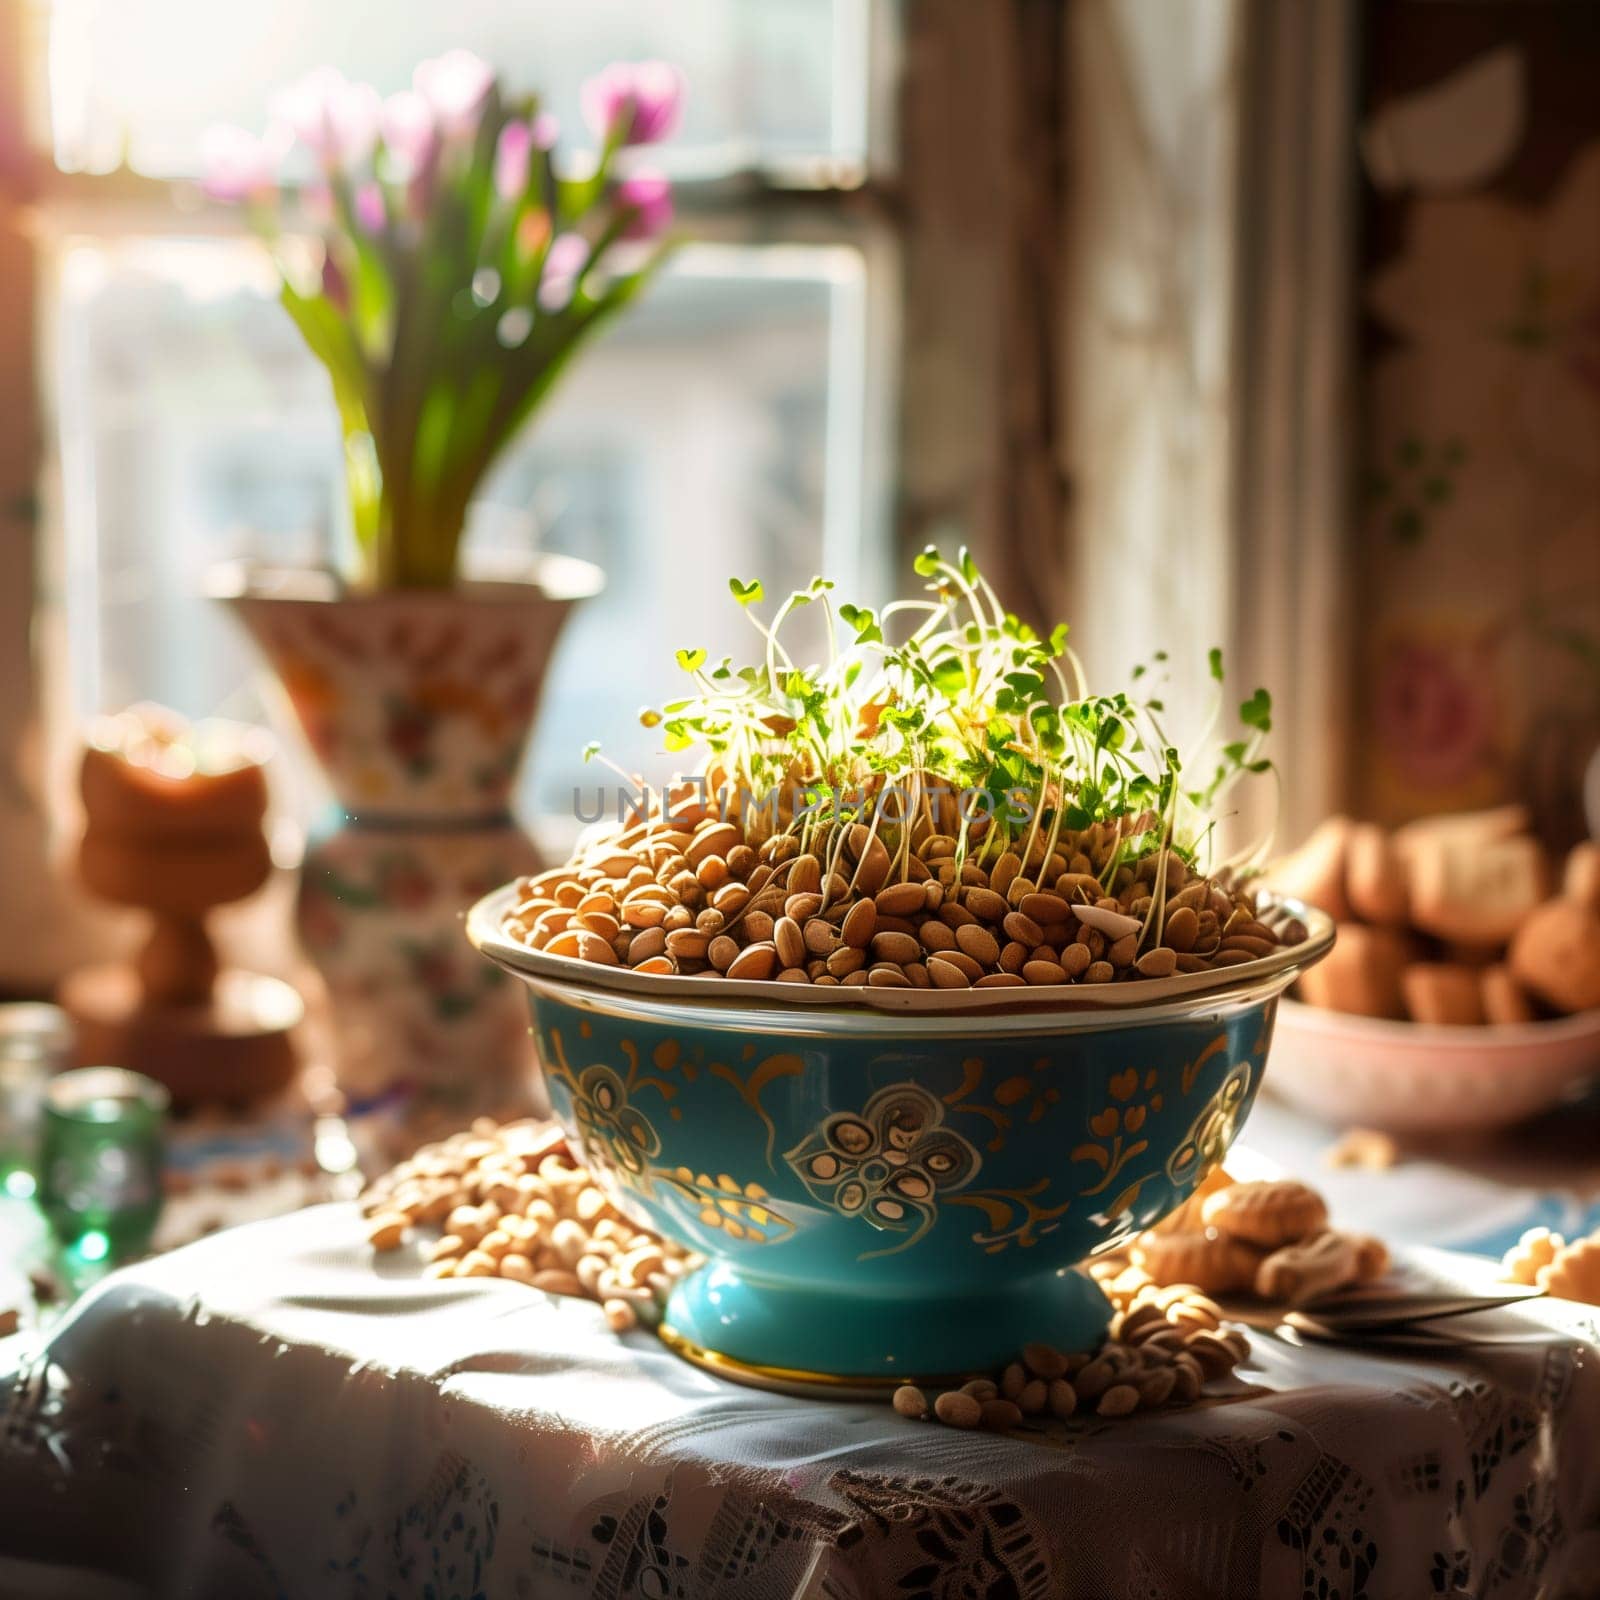 Sprouted wheat in a dish on the table. by Nataliya